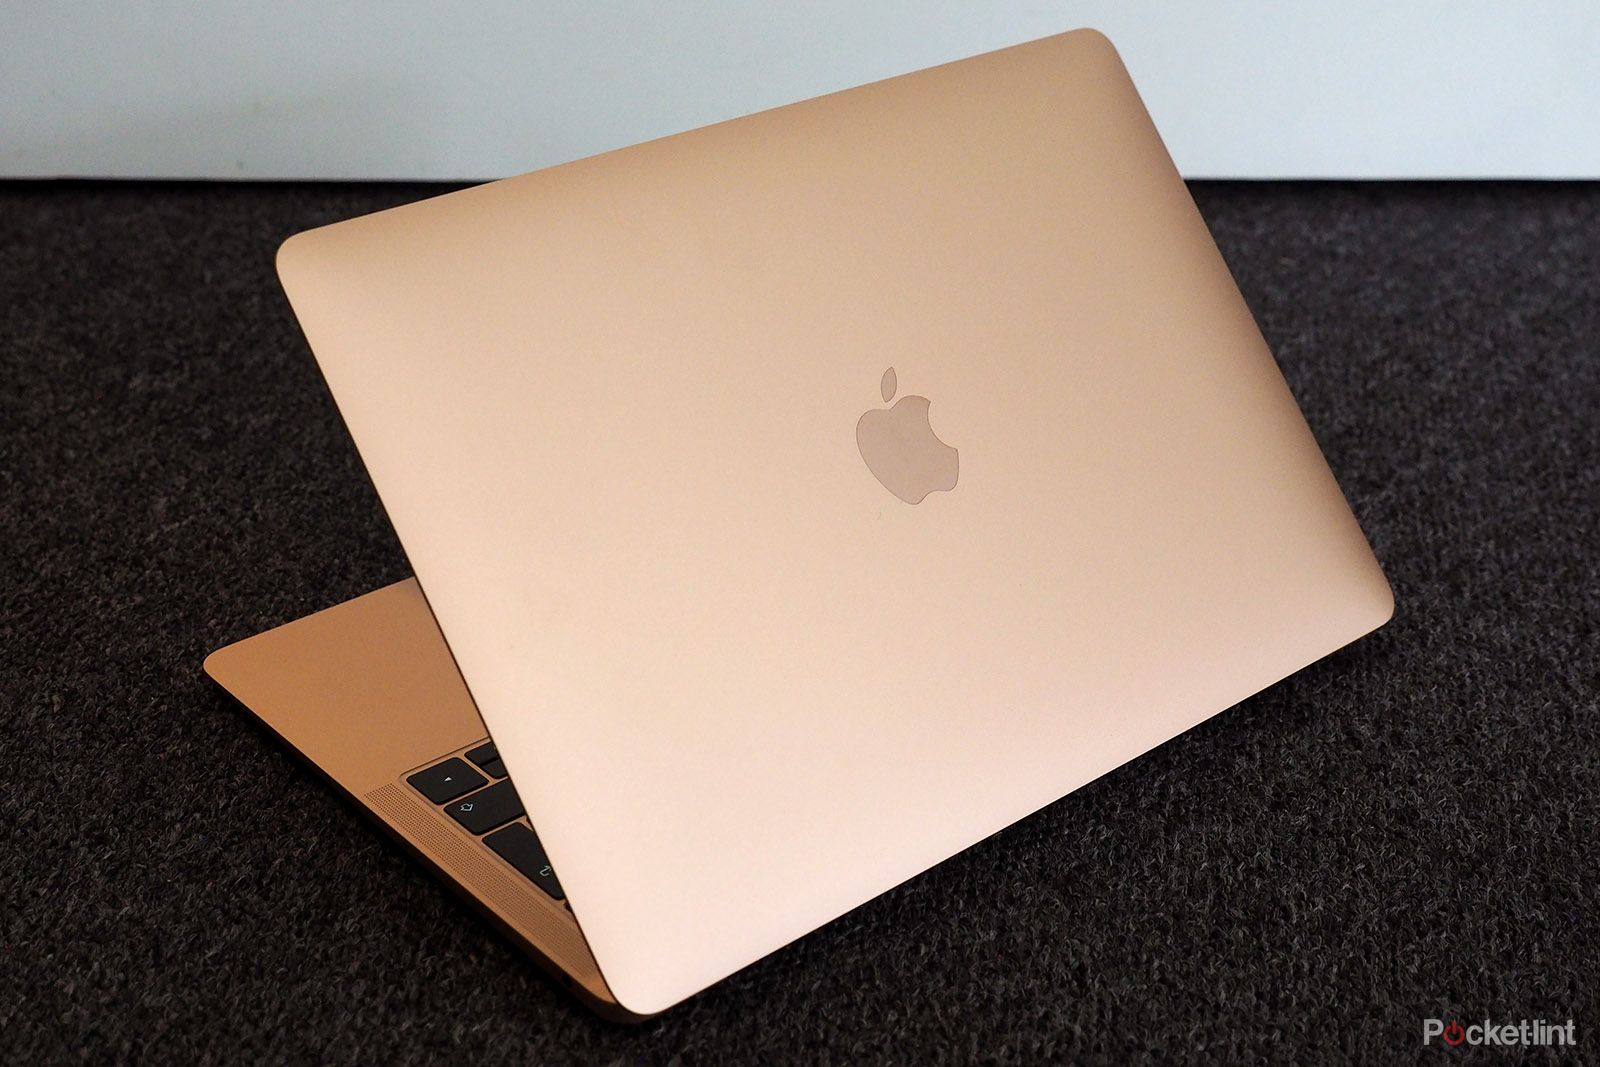 2020 MacBook Air versus the 2019 MacBook Air compared - General Discussion  Discussions on AppleInsider Forums